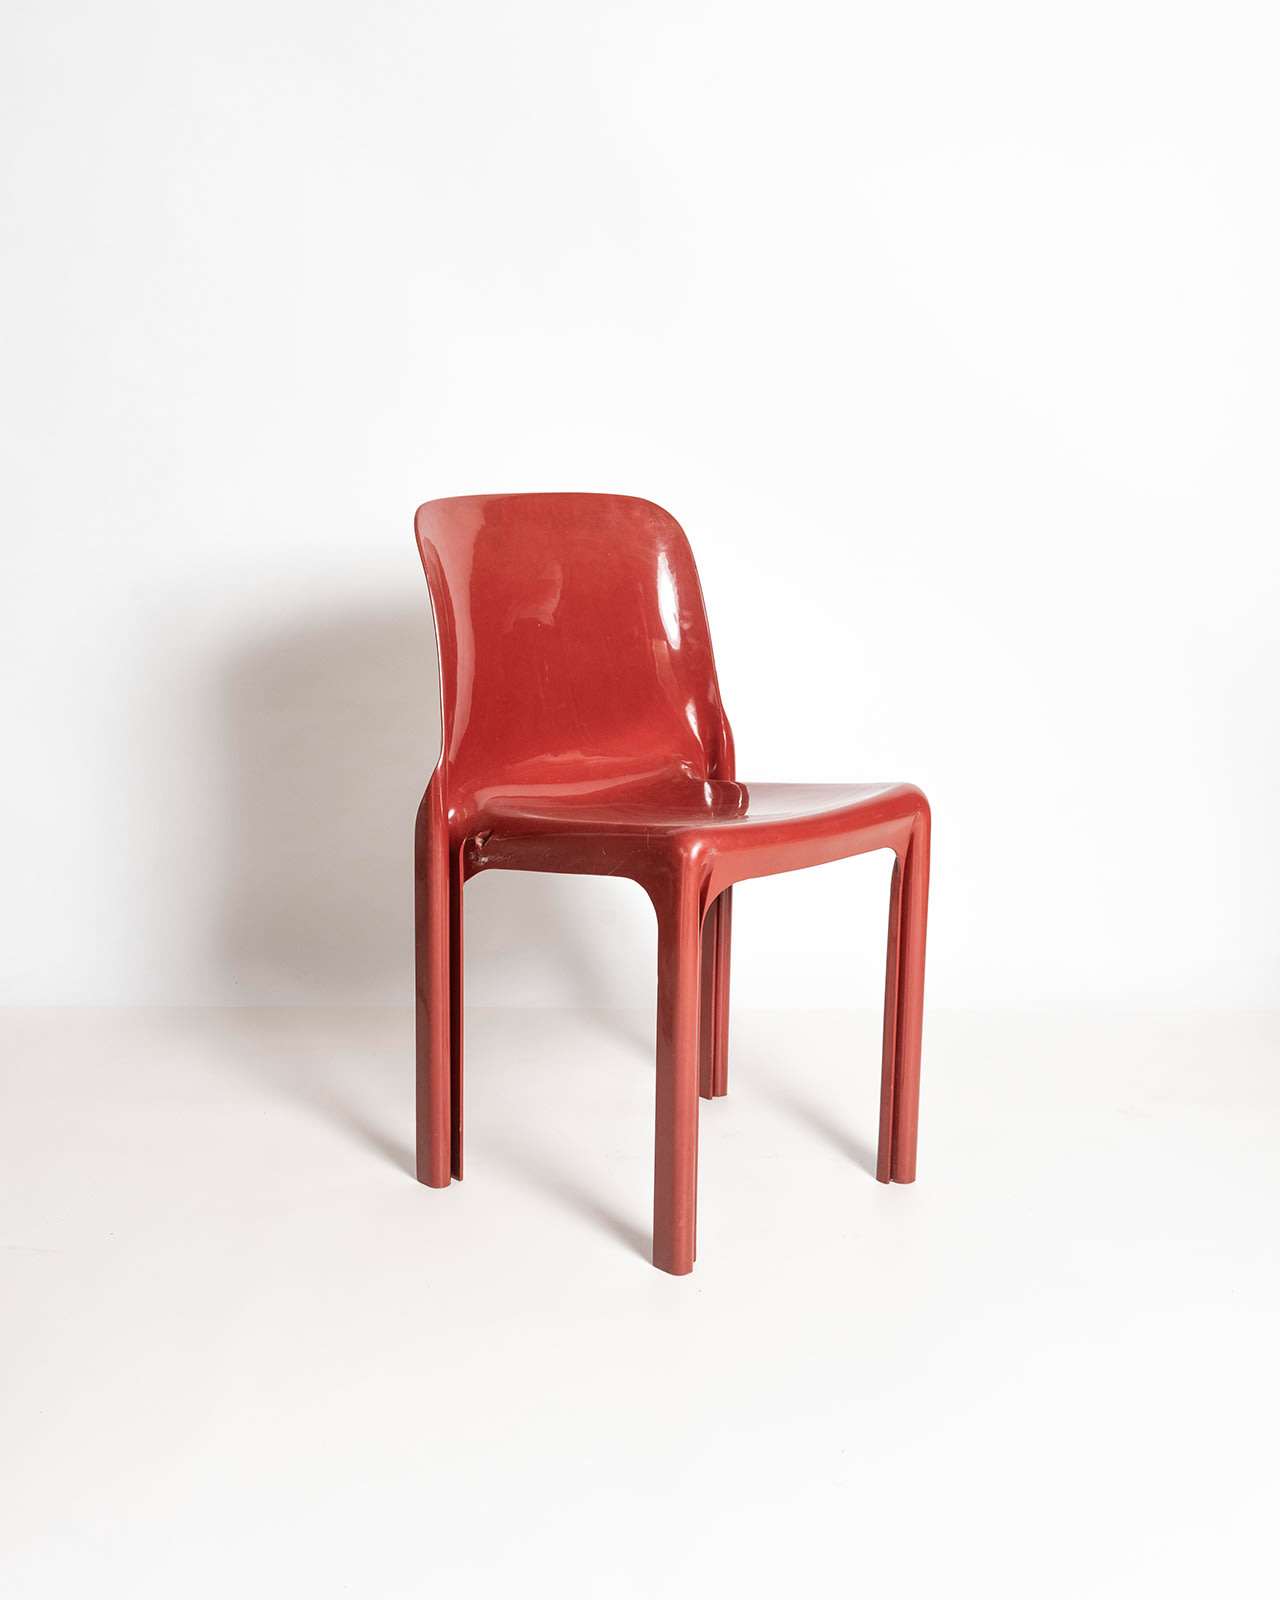 selene Chair Artemide Vico Magistretti 1960 Red re-painted 